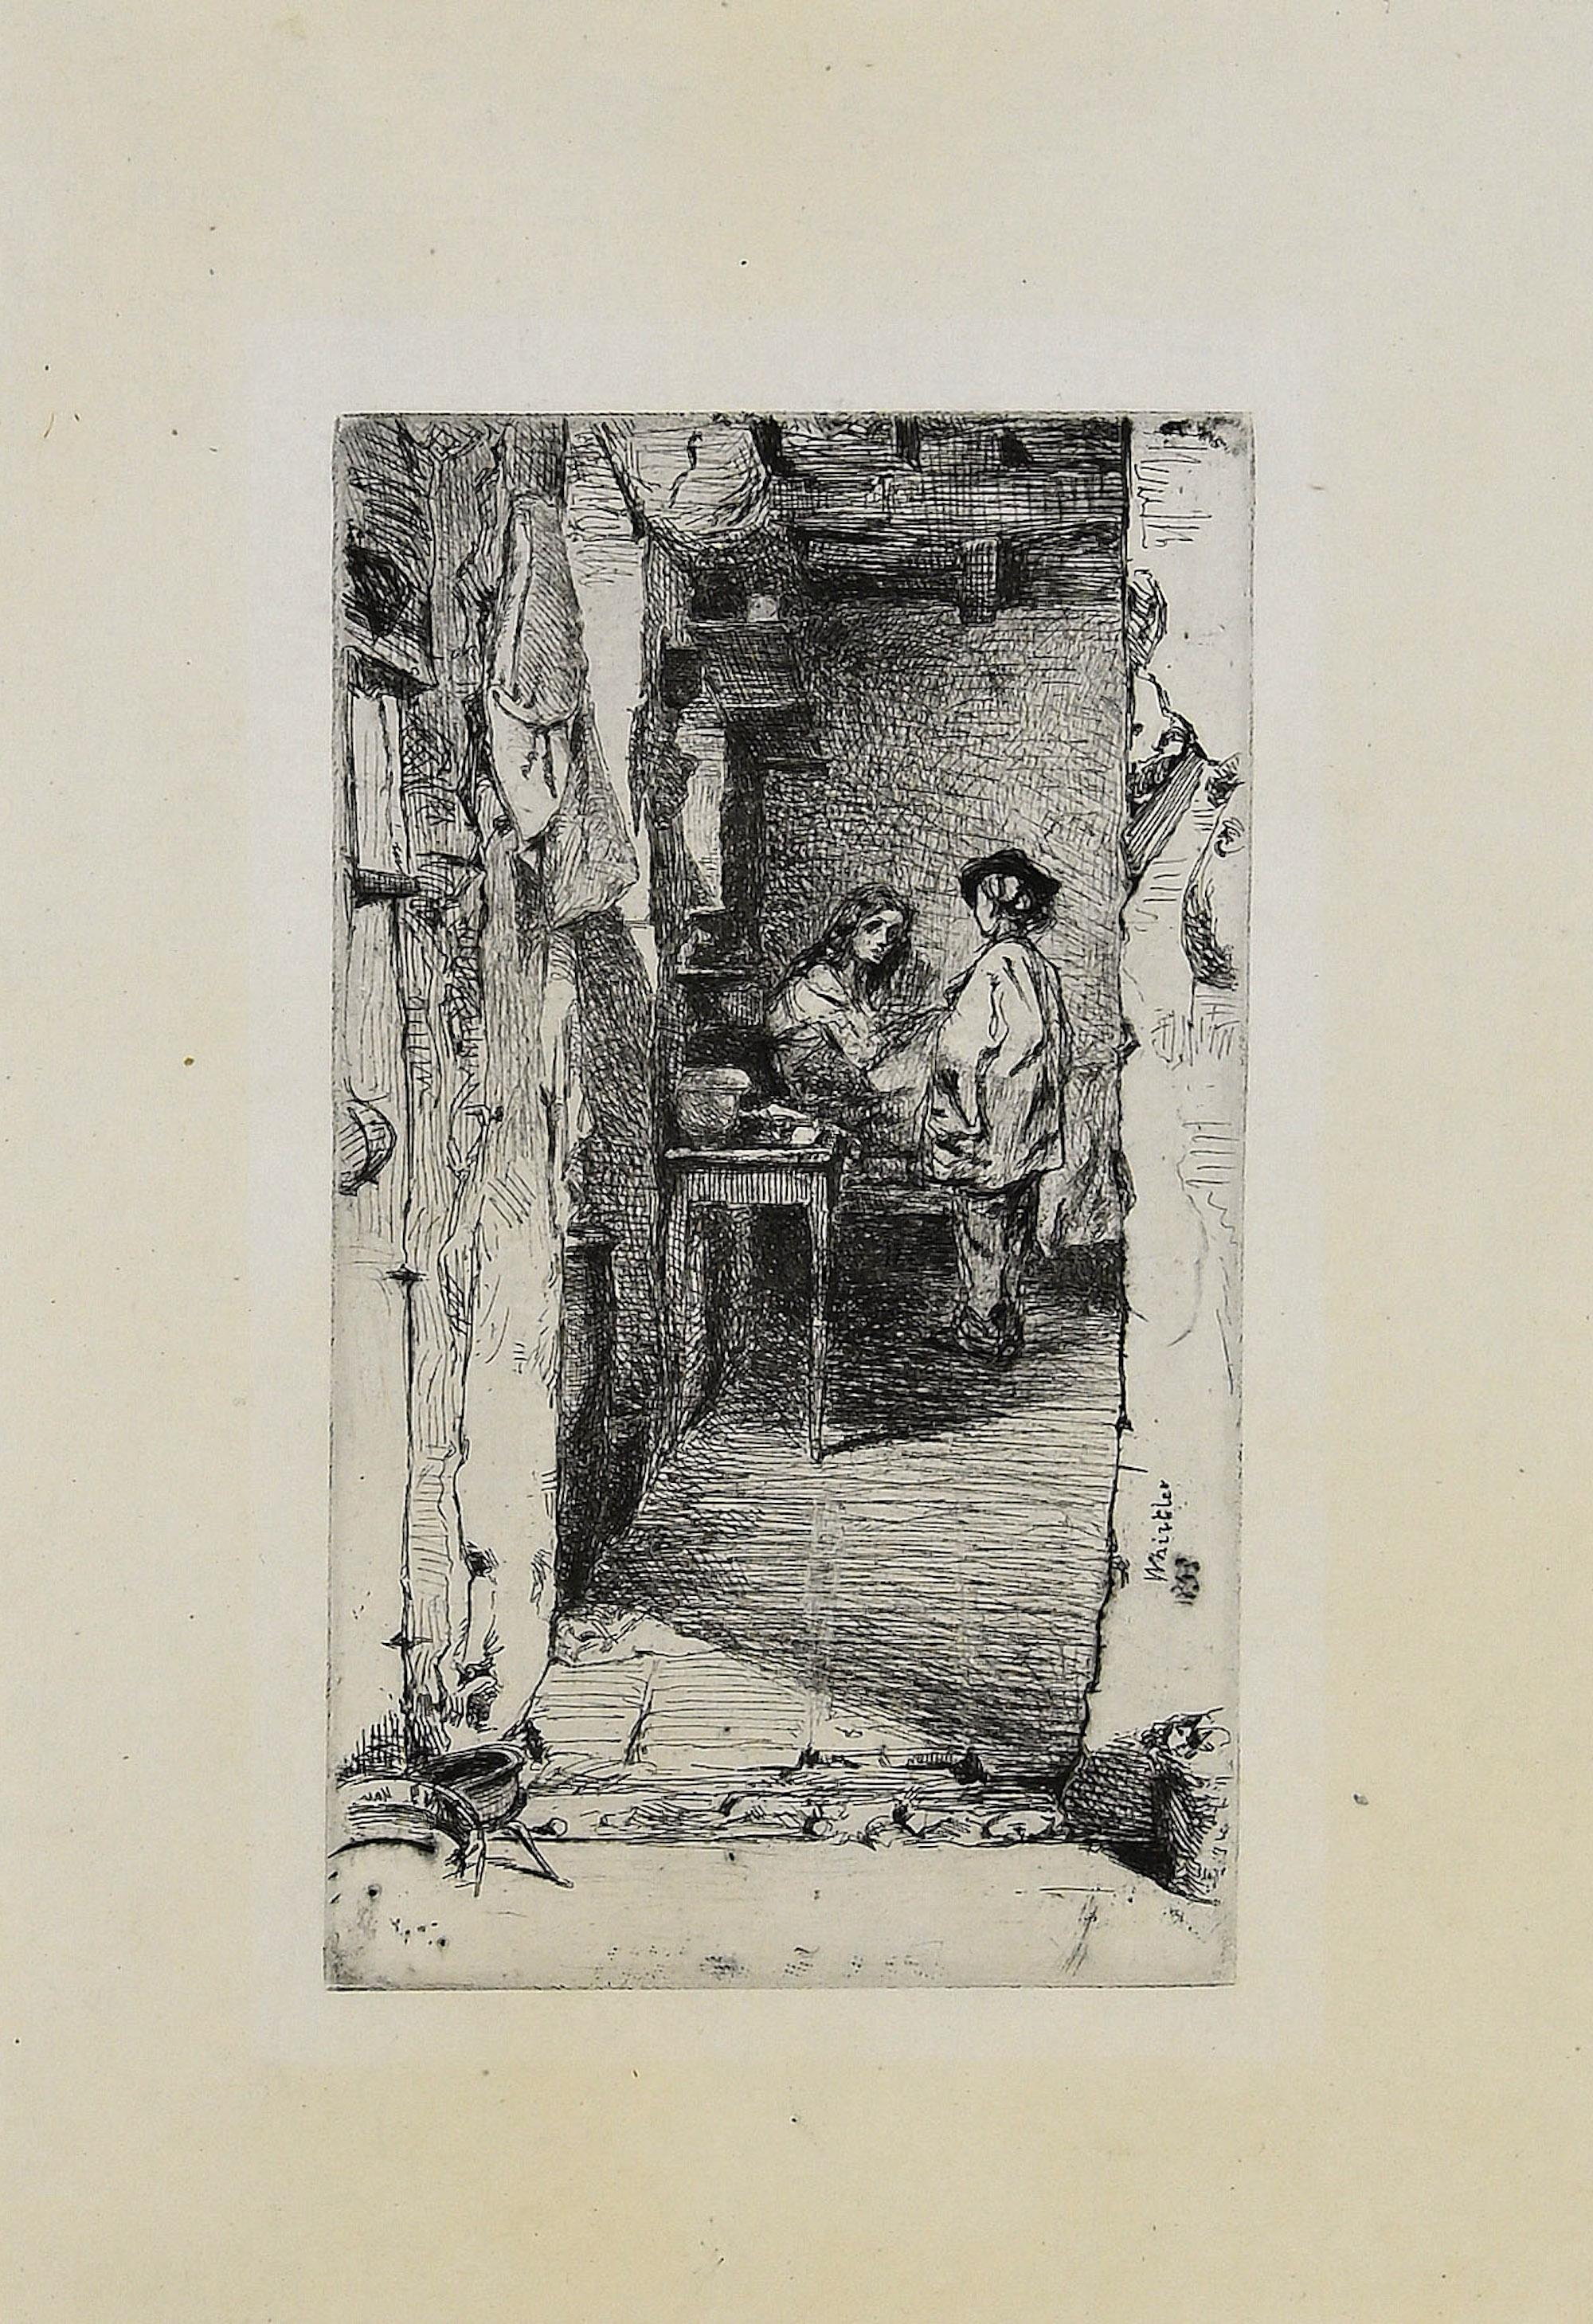 The Rag Gatherers - Original Etching by J.A. Whistler - 1858 - Print by James Abbott McNeill Whistler